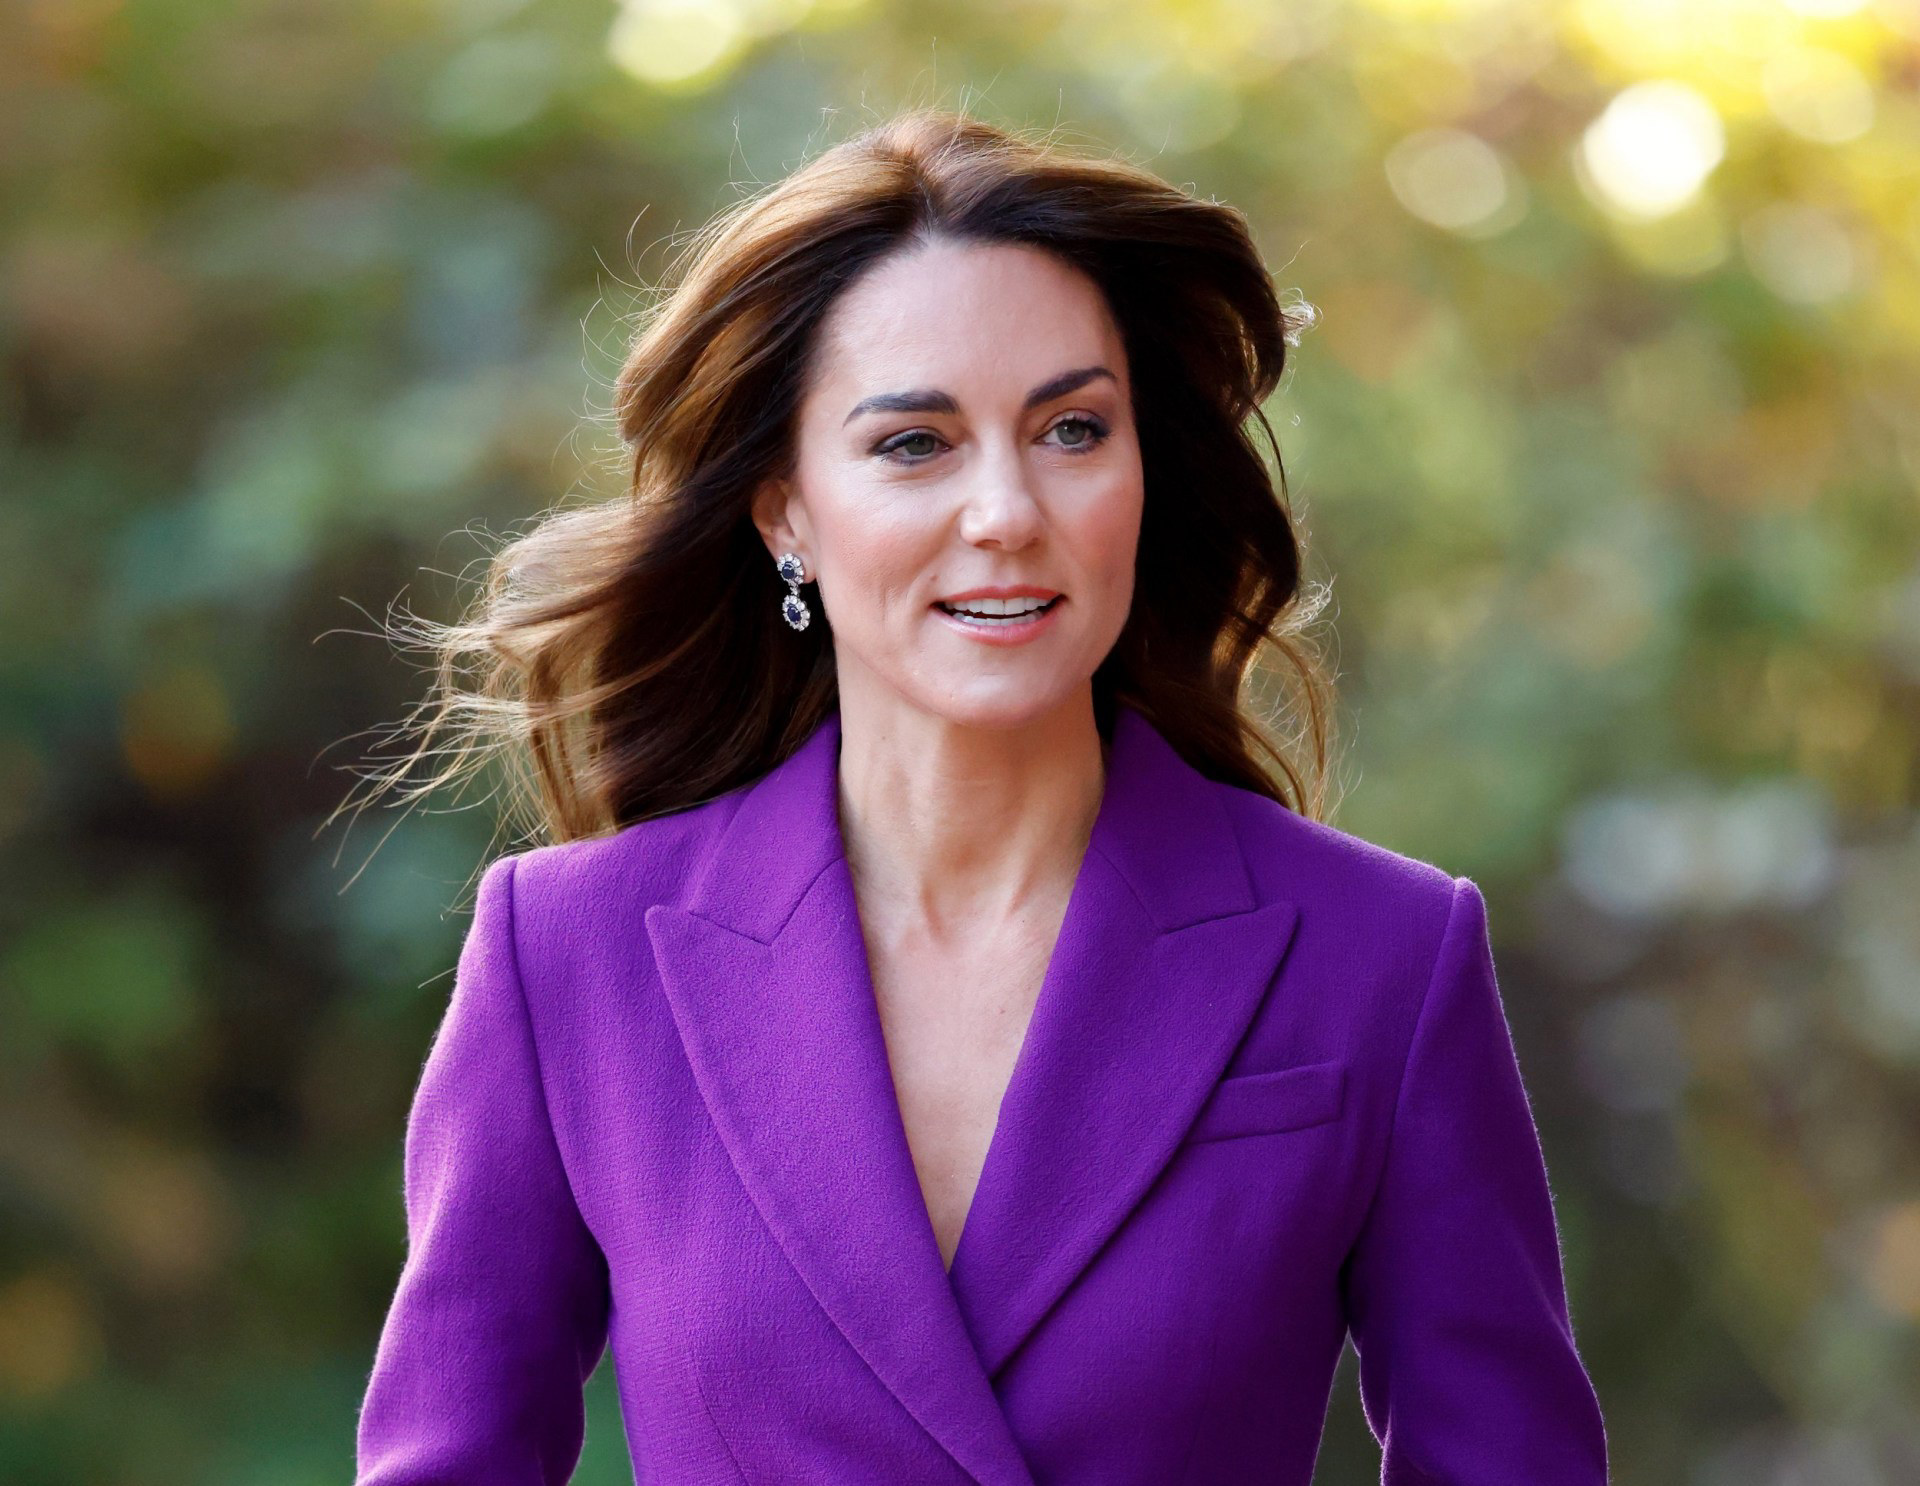 Major update on Kate Middleton's health following abdominal surgery